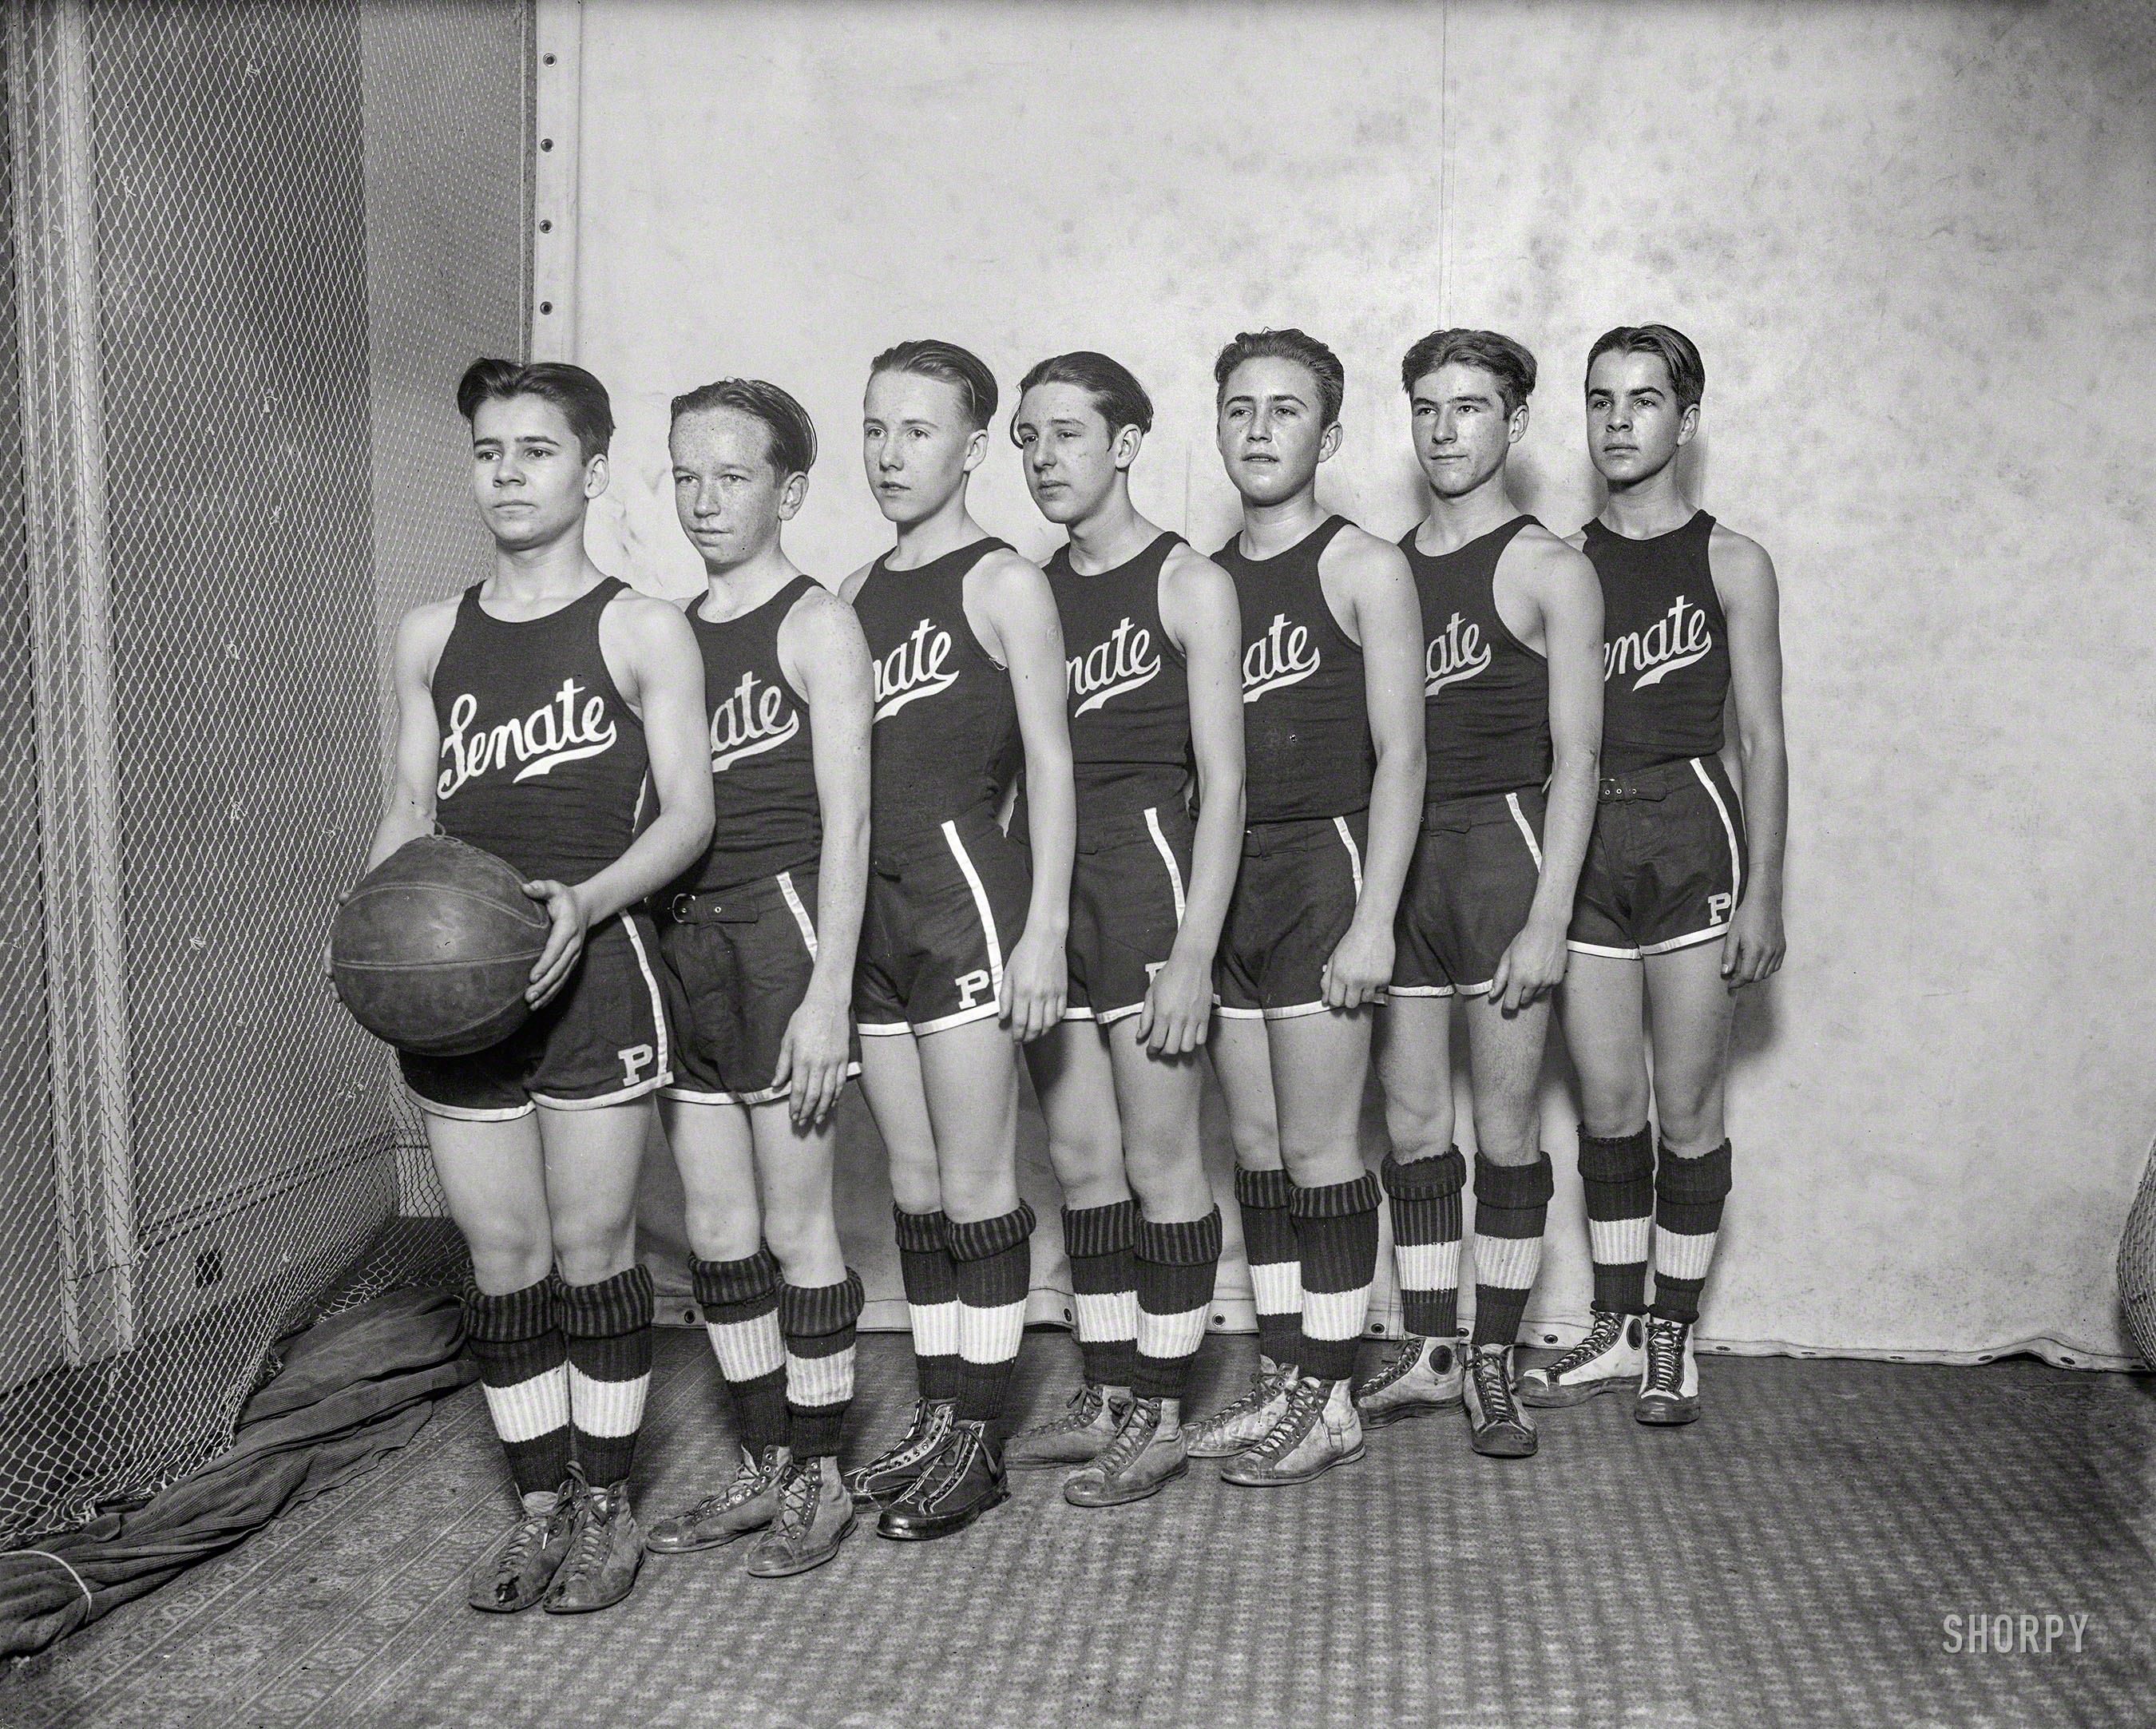 Washington, D.C., 1927. "Congressional pages -- Senate basketball." Looking forward to Tuesday's big game. Harris & Ewing glass negative. View full size.